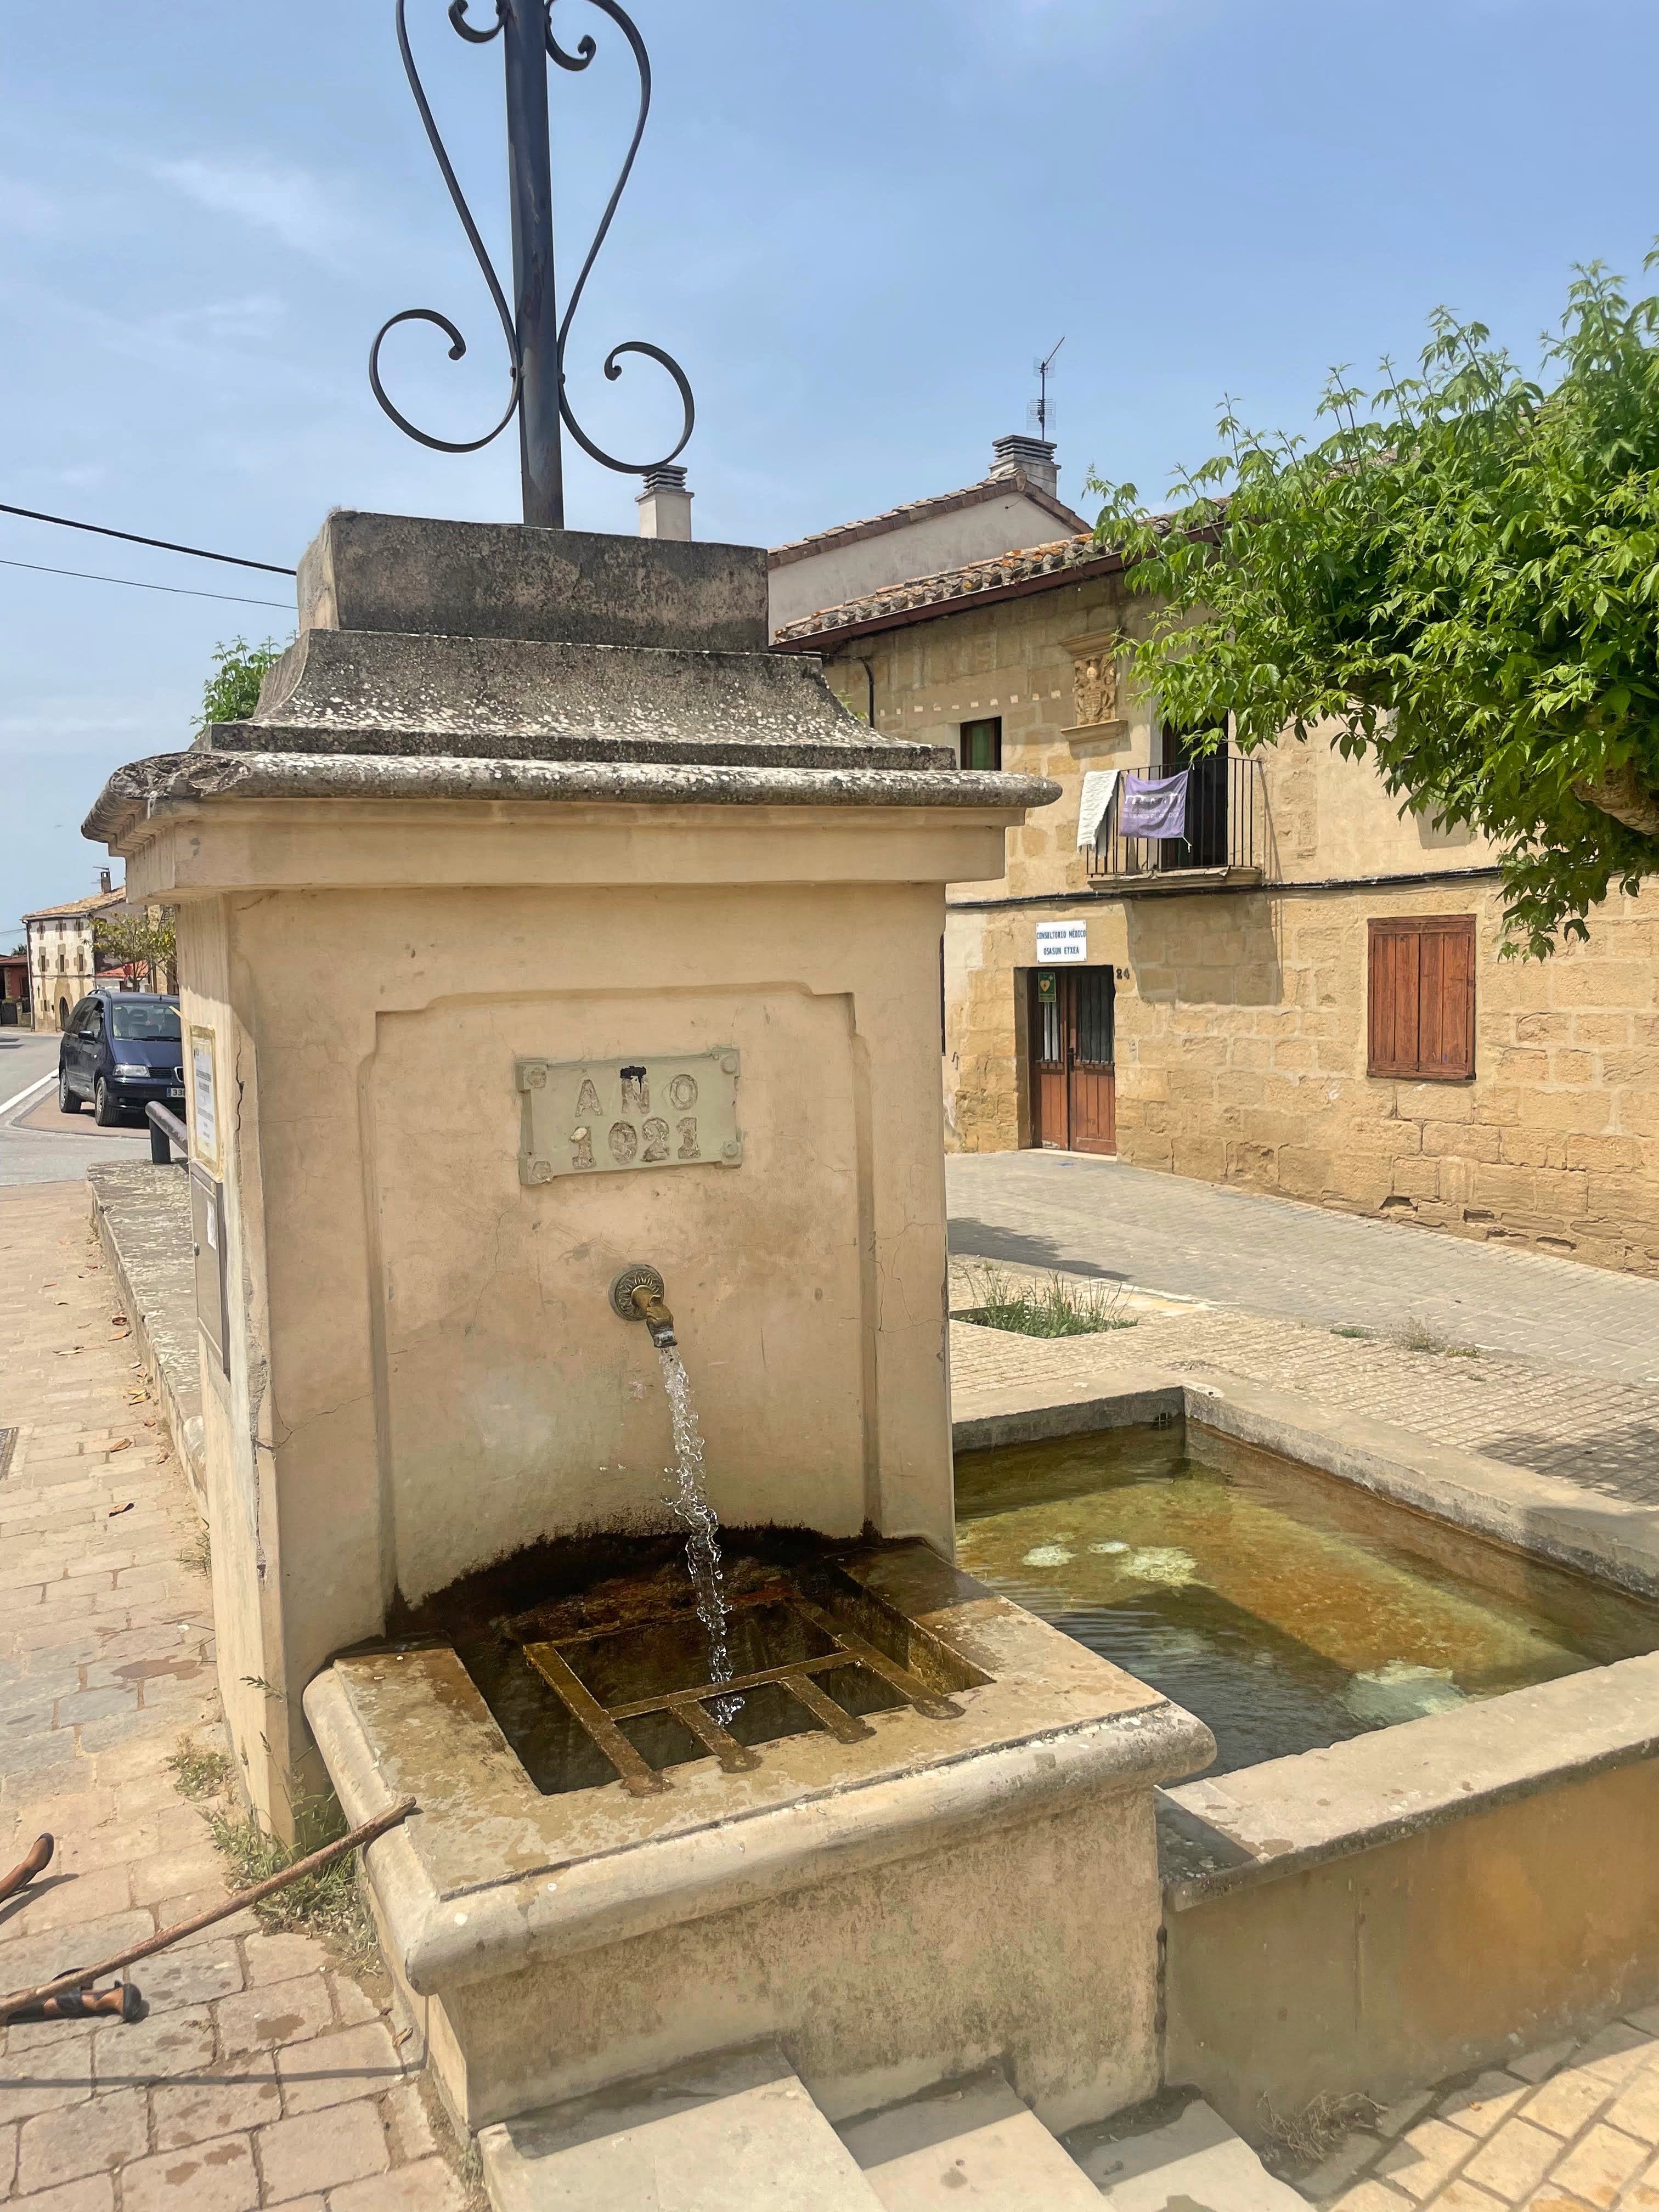 Spain has so many of these water fountain that you can sip and dip your feets to cool off.